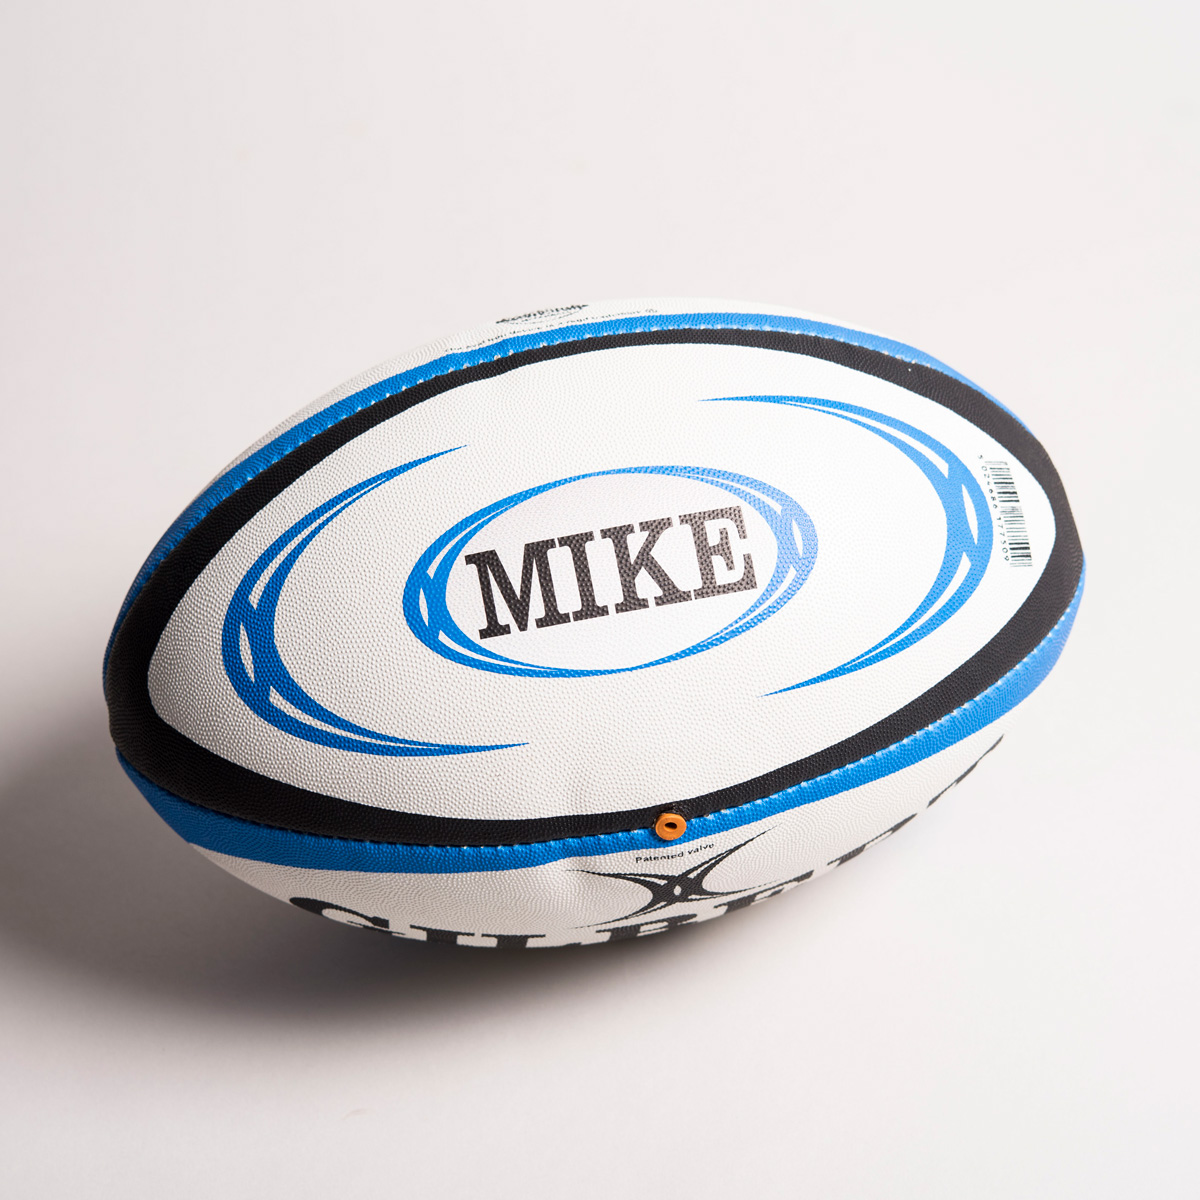 Personalised Gilbert Omega Rugby Ball - Name